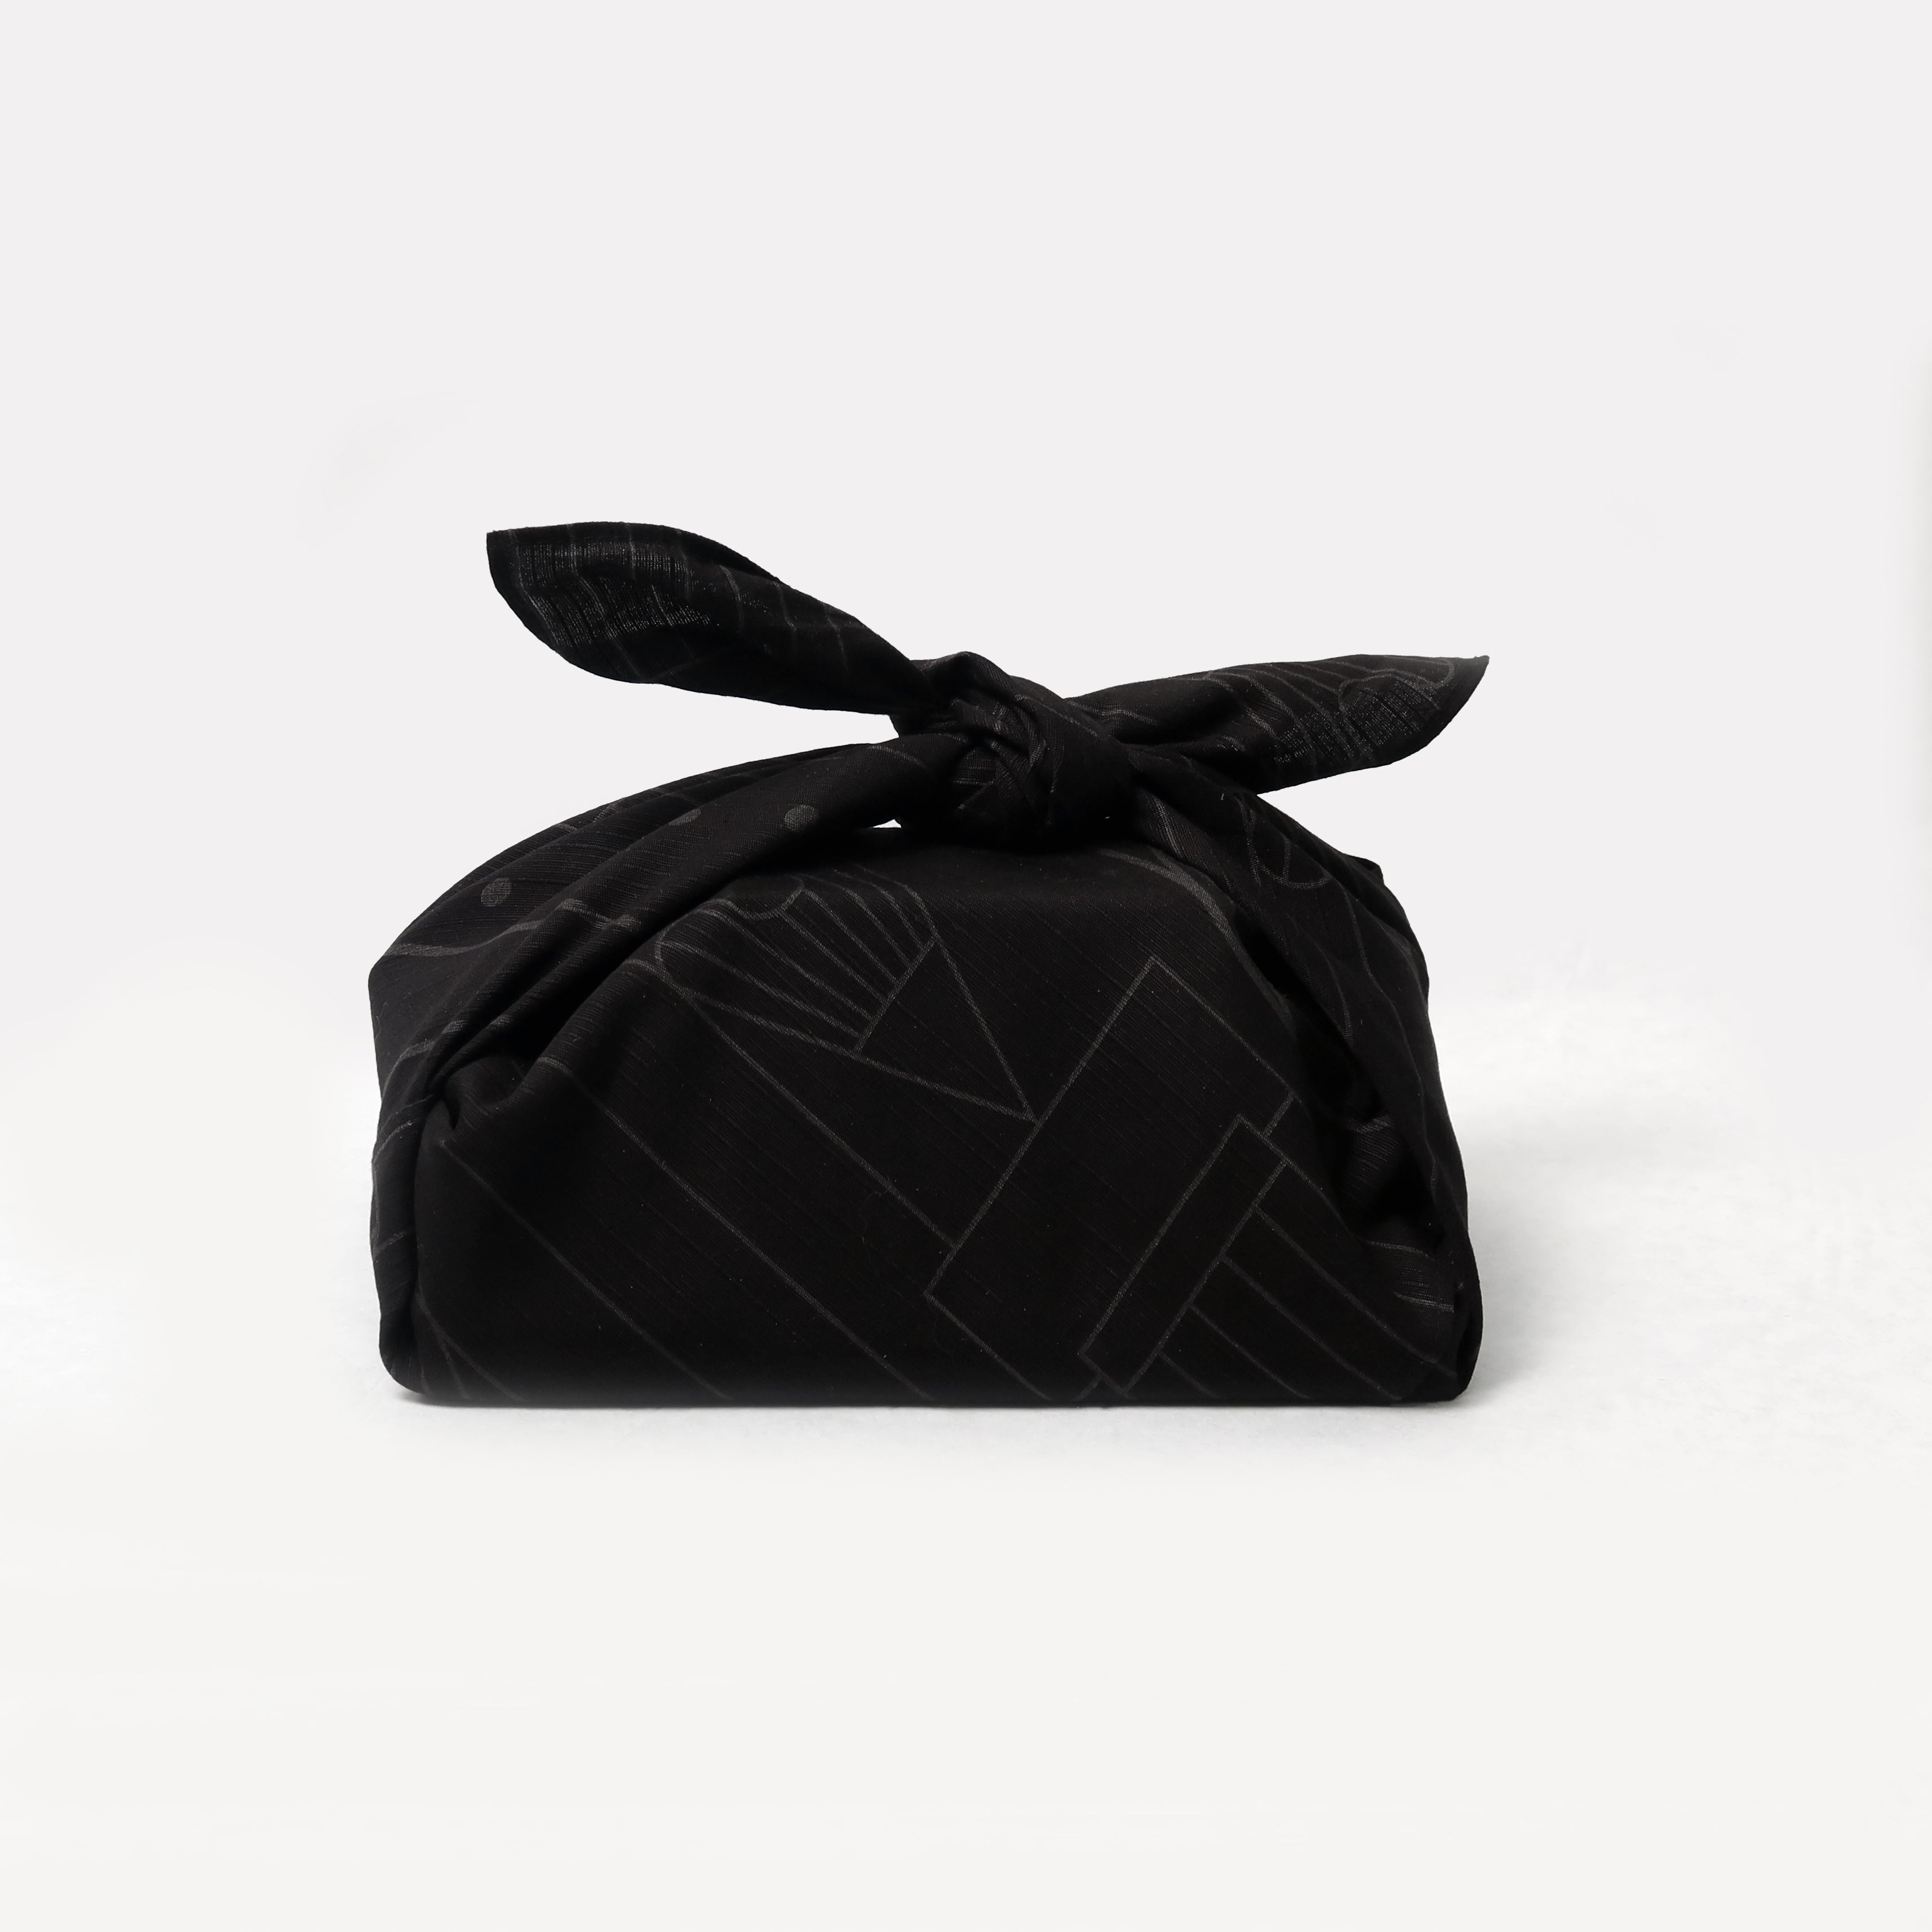 An eco-friendly Blackwing Furoshiki adorned with a black bow.